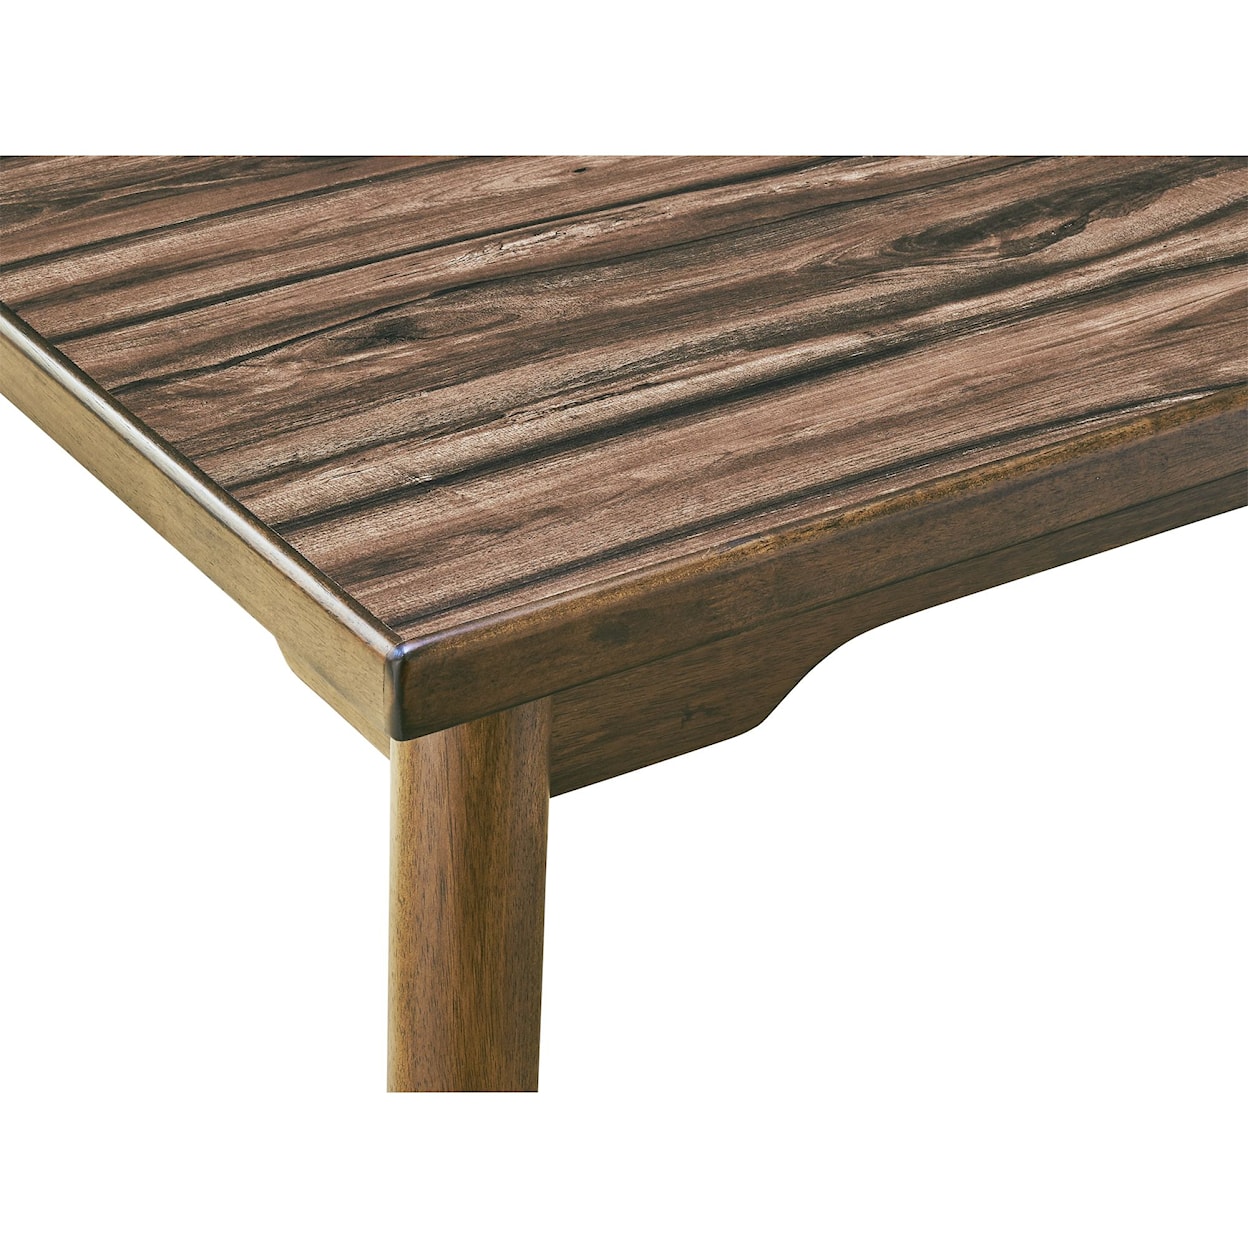 Elements Ginger Dining Table